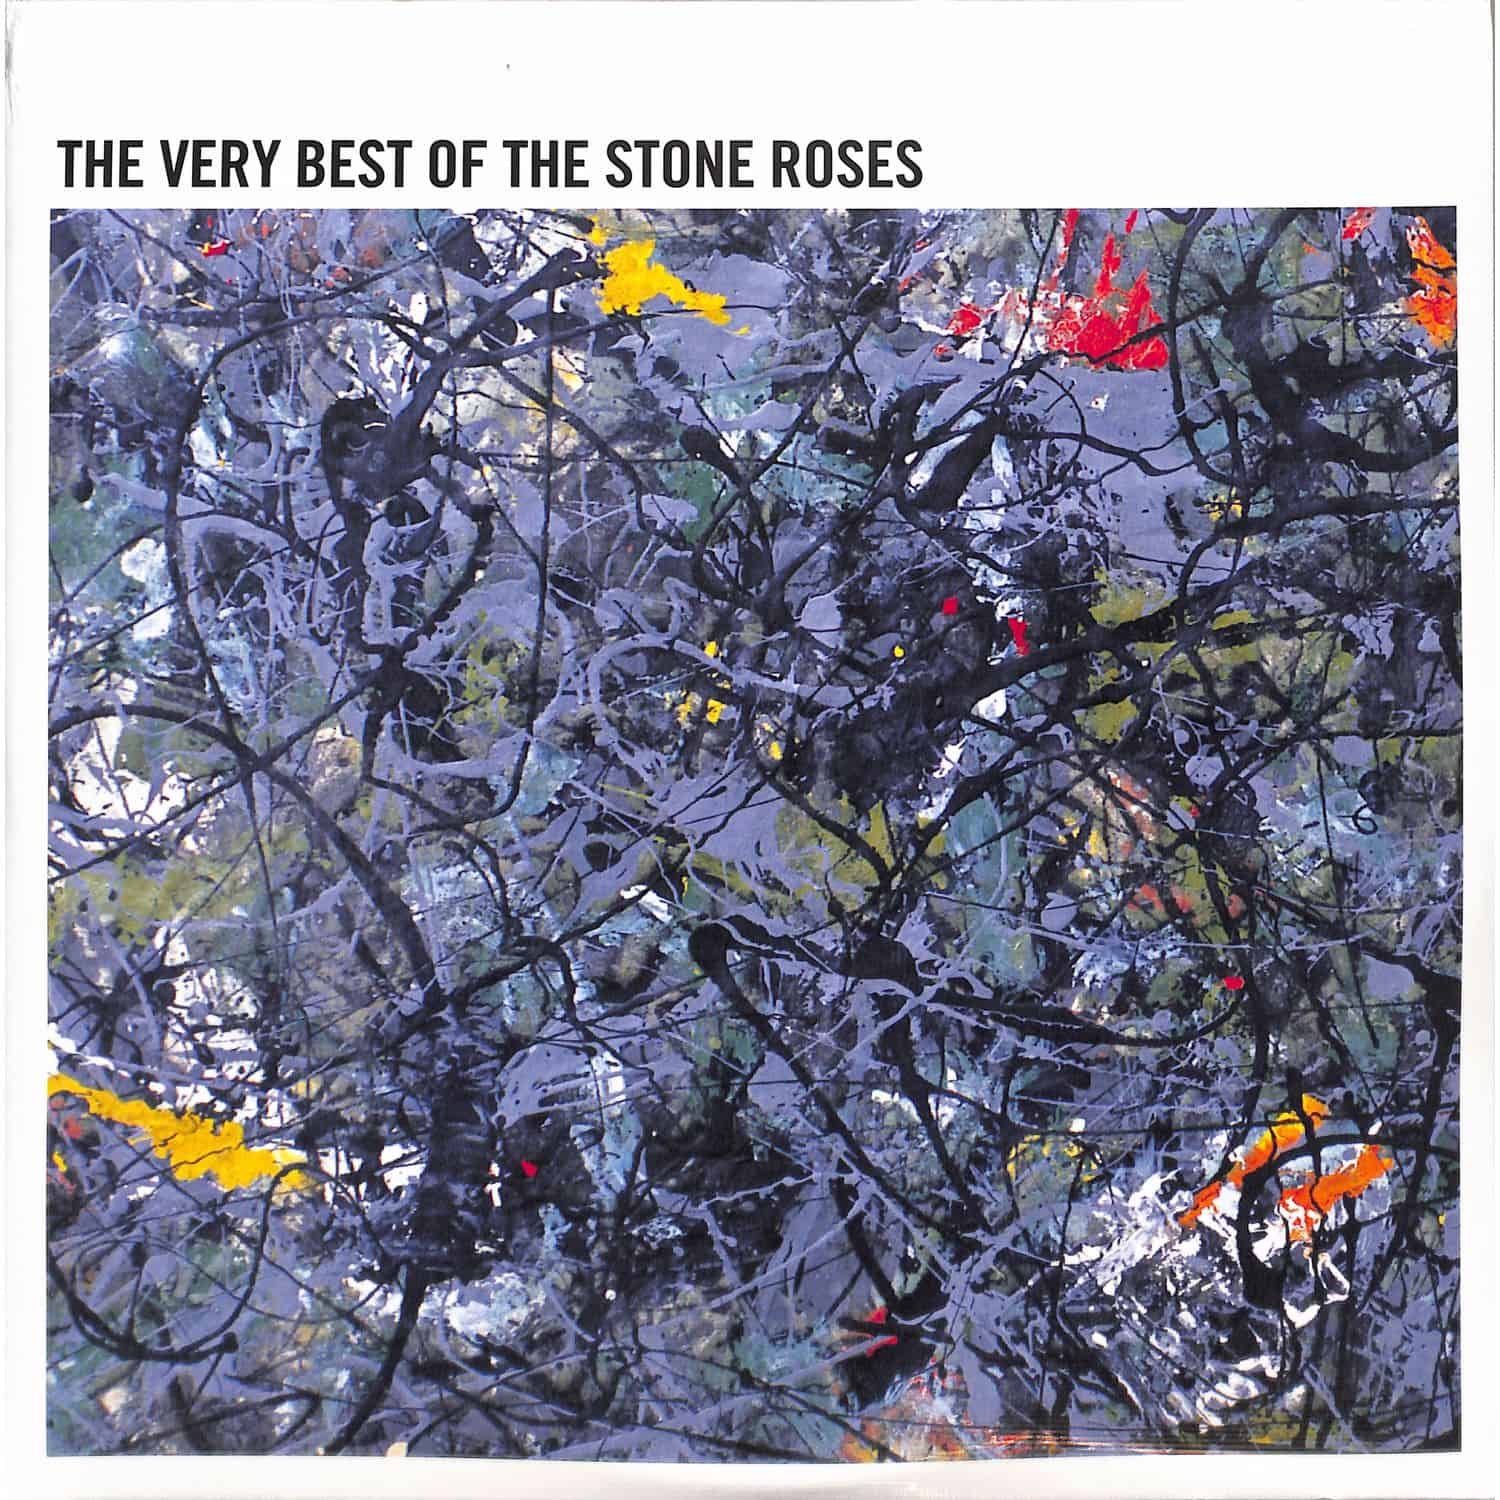 The Stone Roses - THE VERY BEST OF THE STONE ROSES 